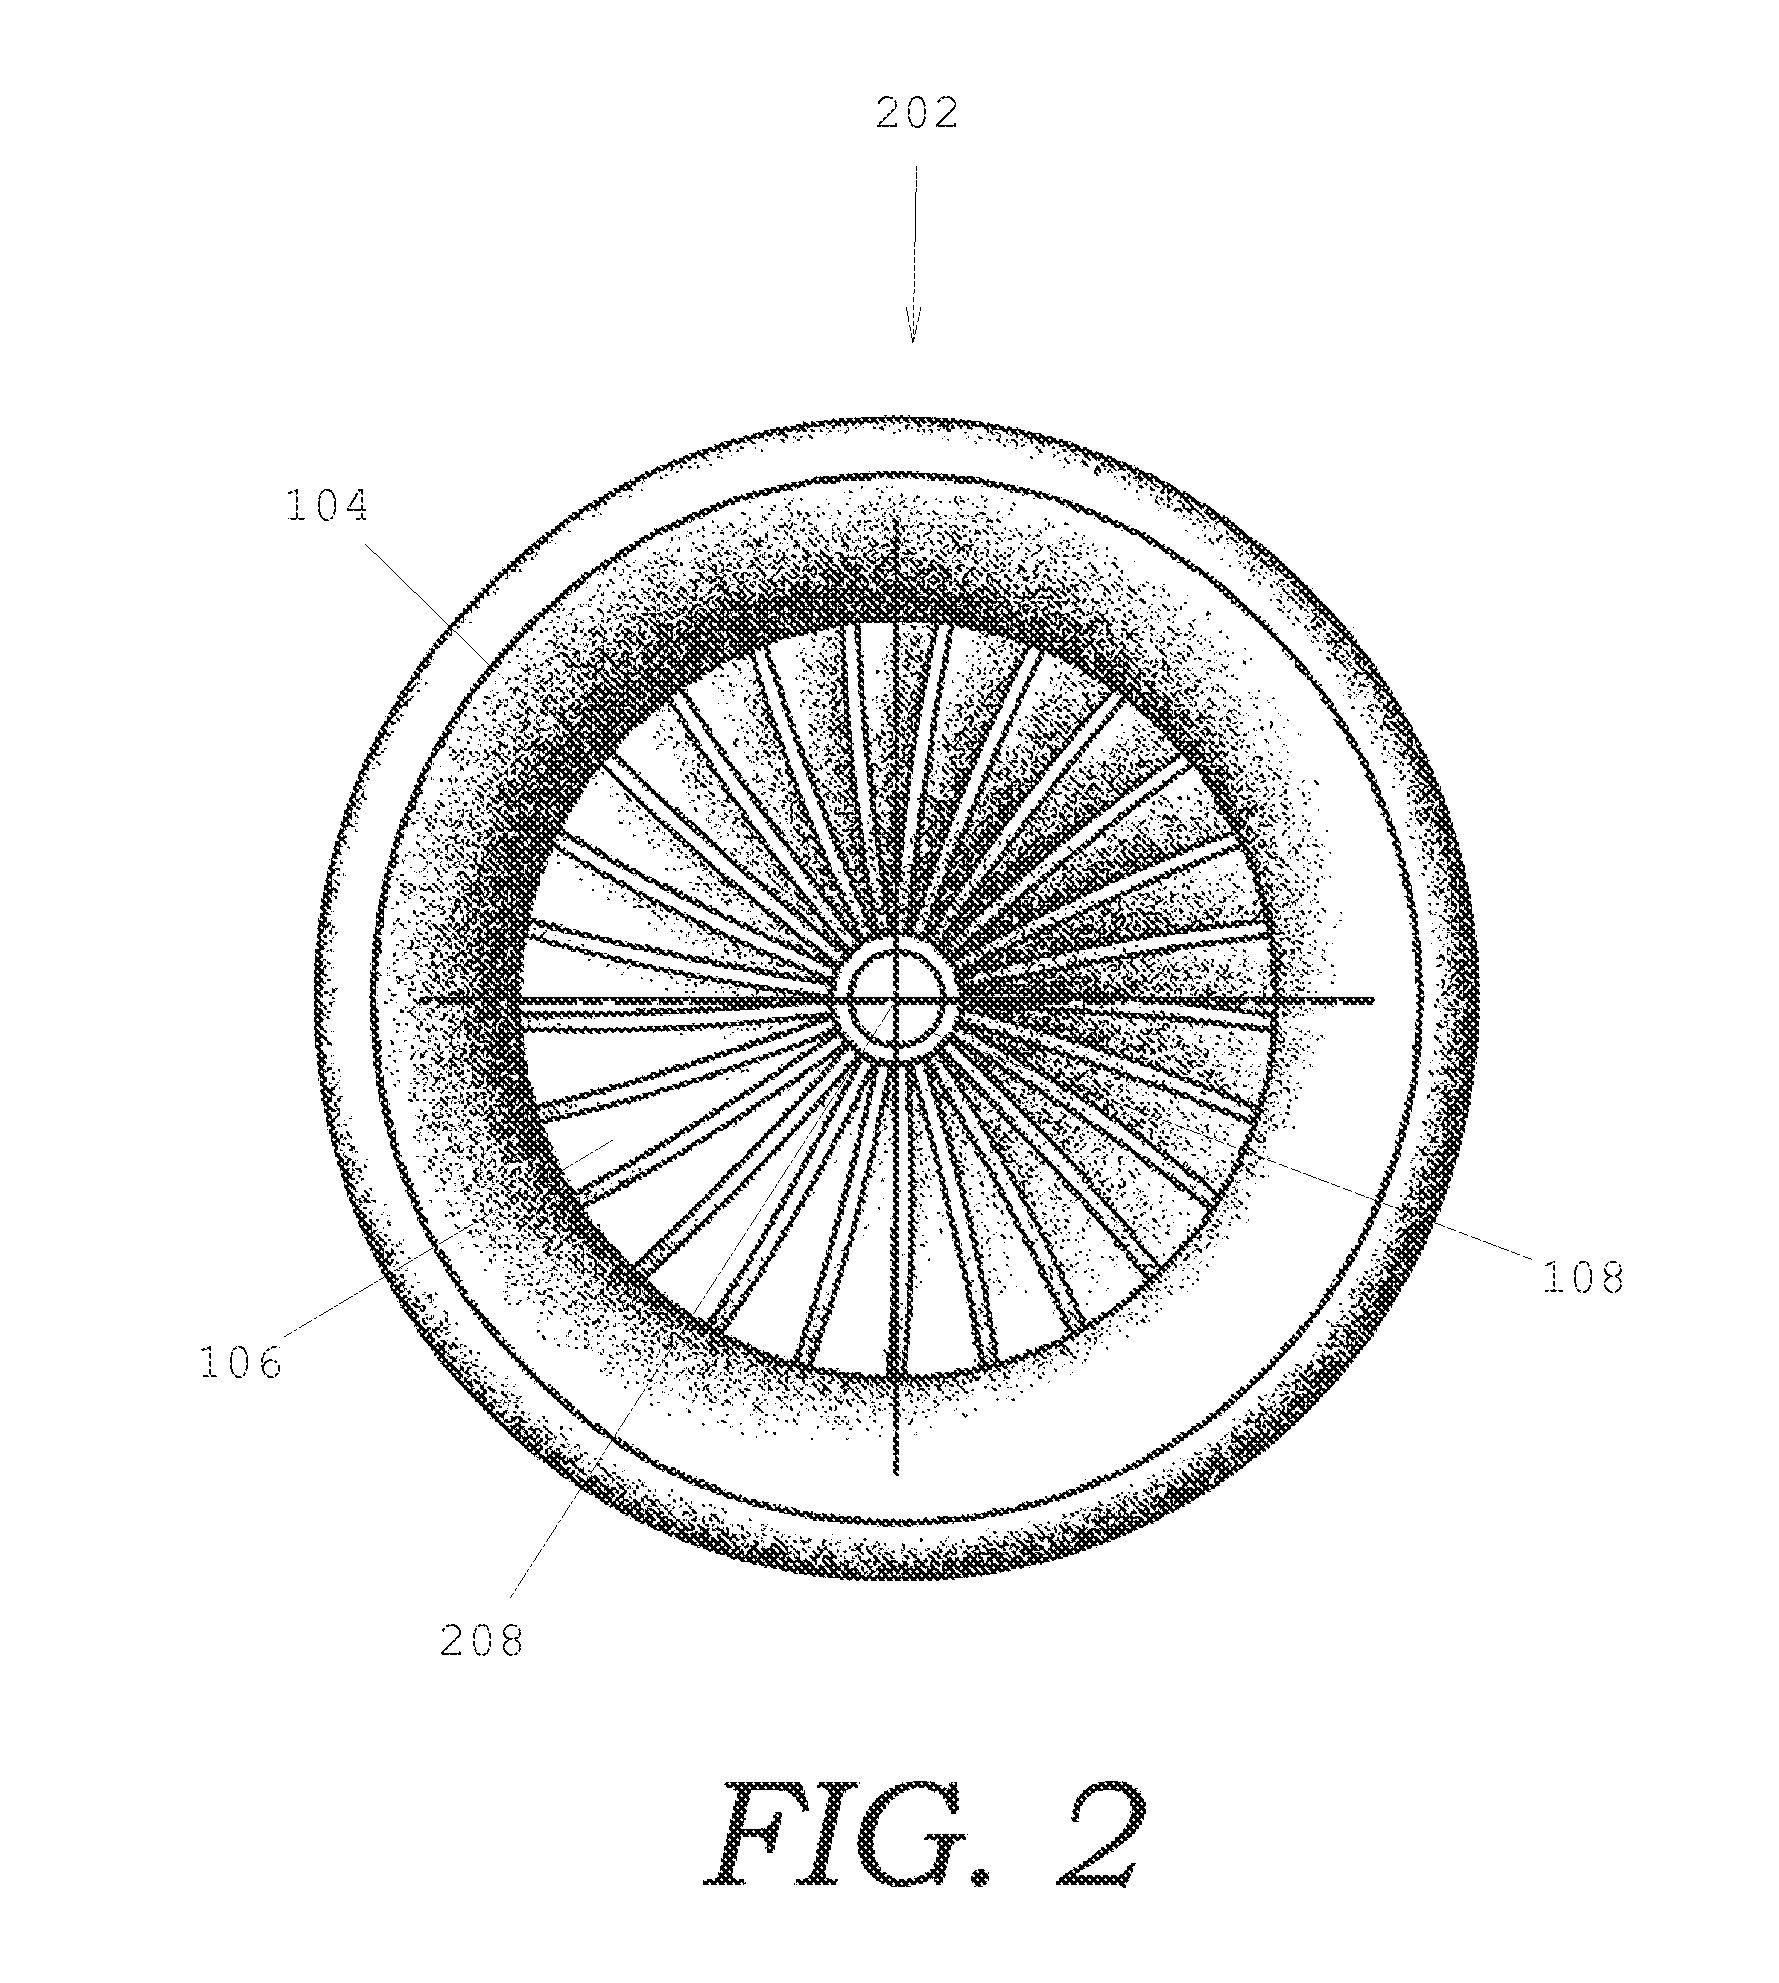 Rotational ducted fan (RDF) propulsion system